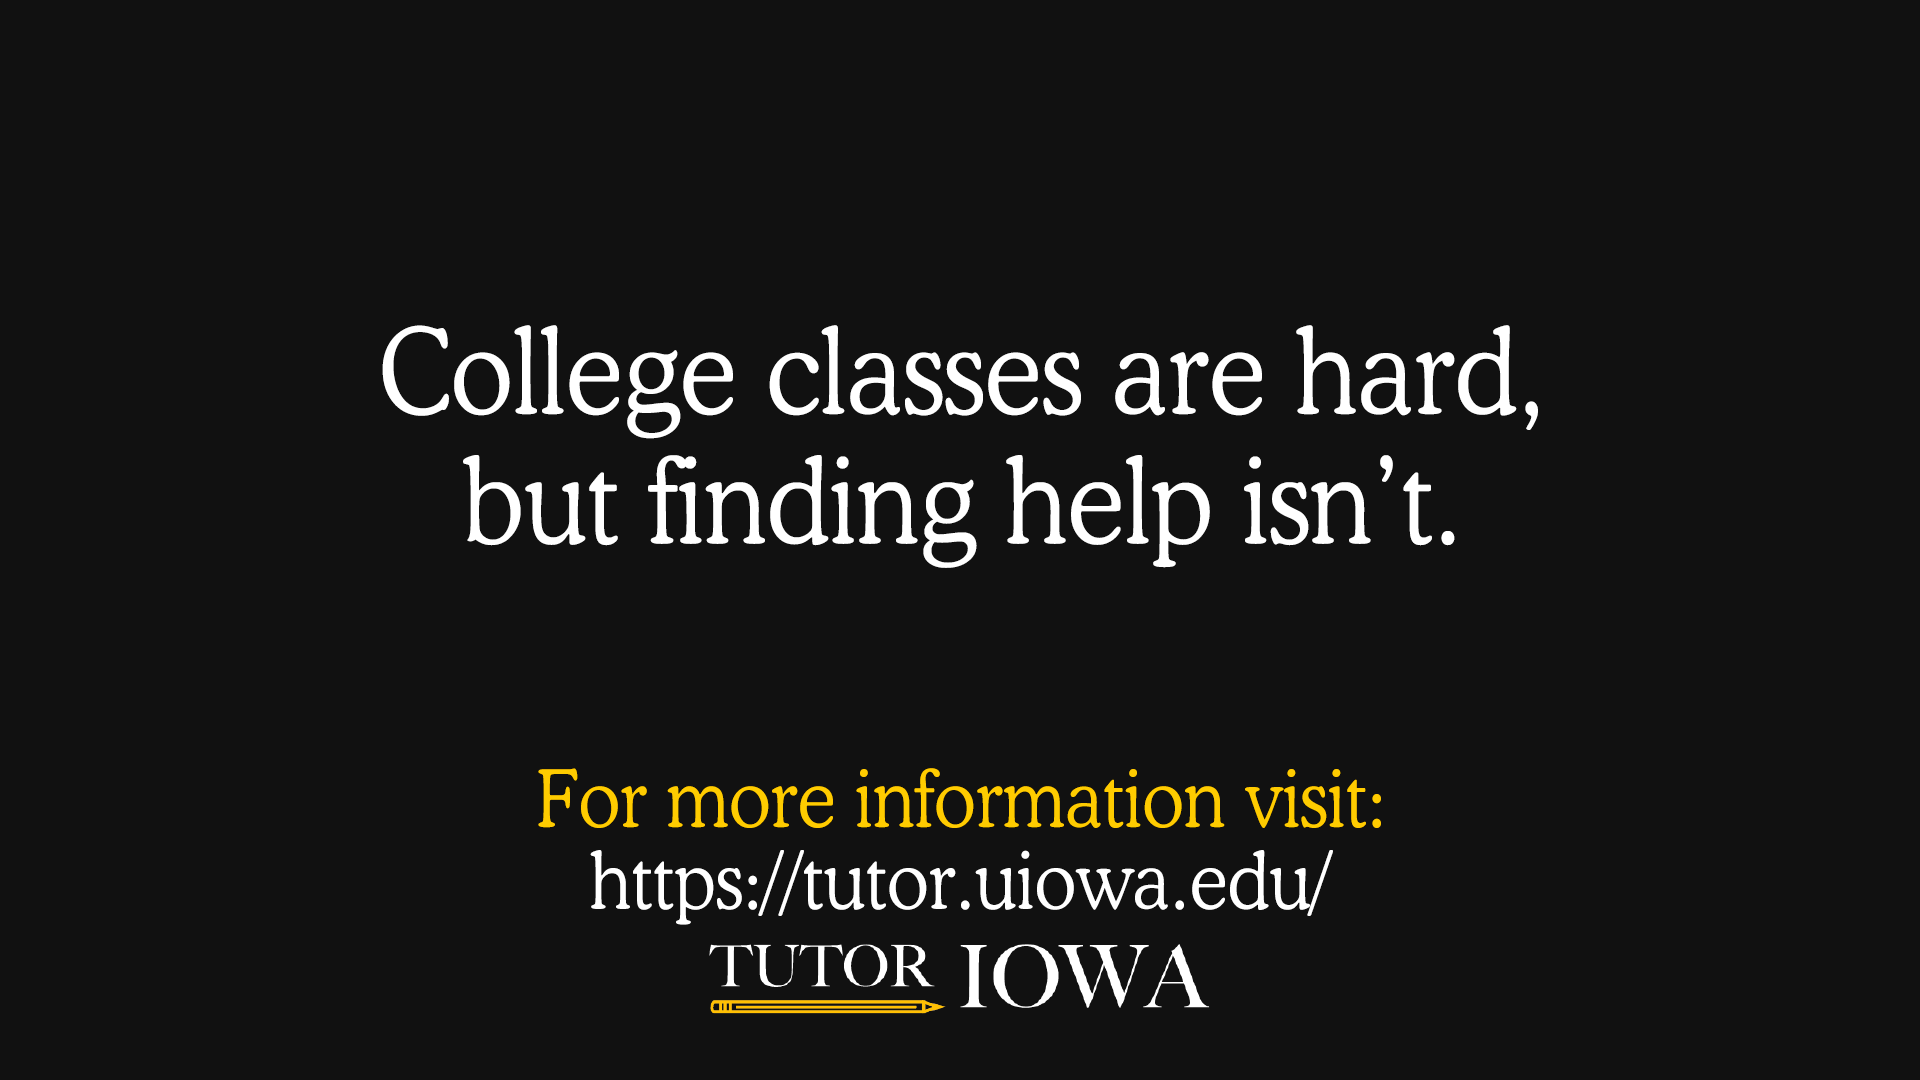 College classes are hard, but finding help isn't. For more information, visit: https://tutor.uiowa.edu.